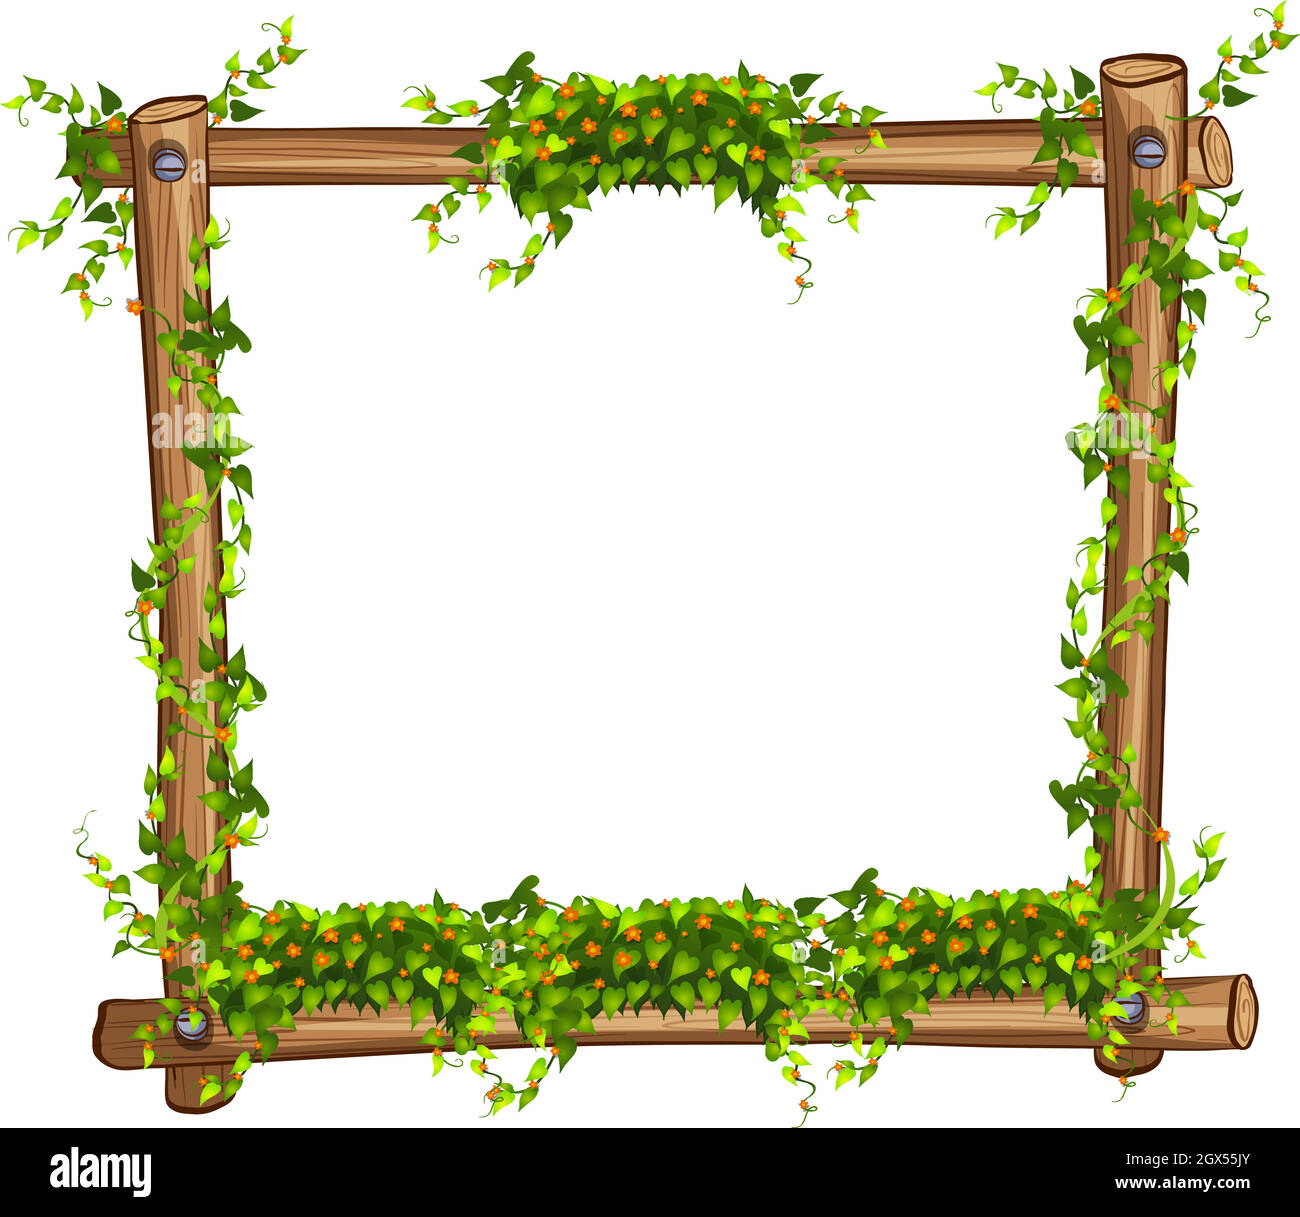 Frame with vine and flowers Stock Vector